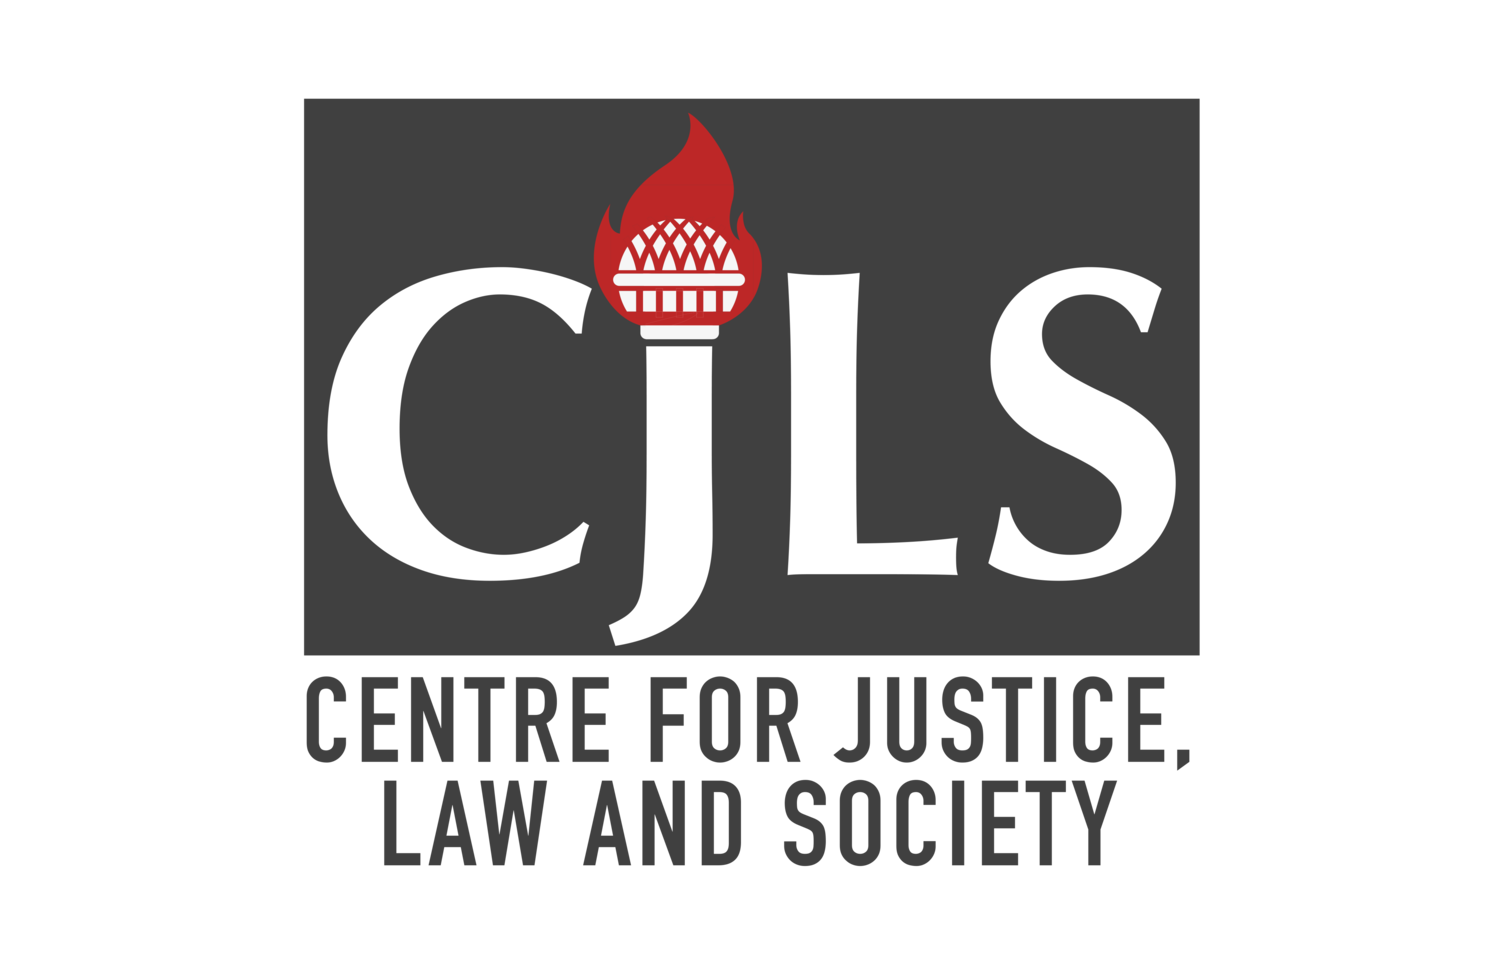 Centre for Justice, Law and Society